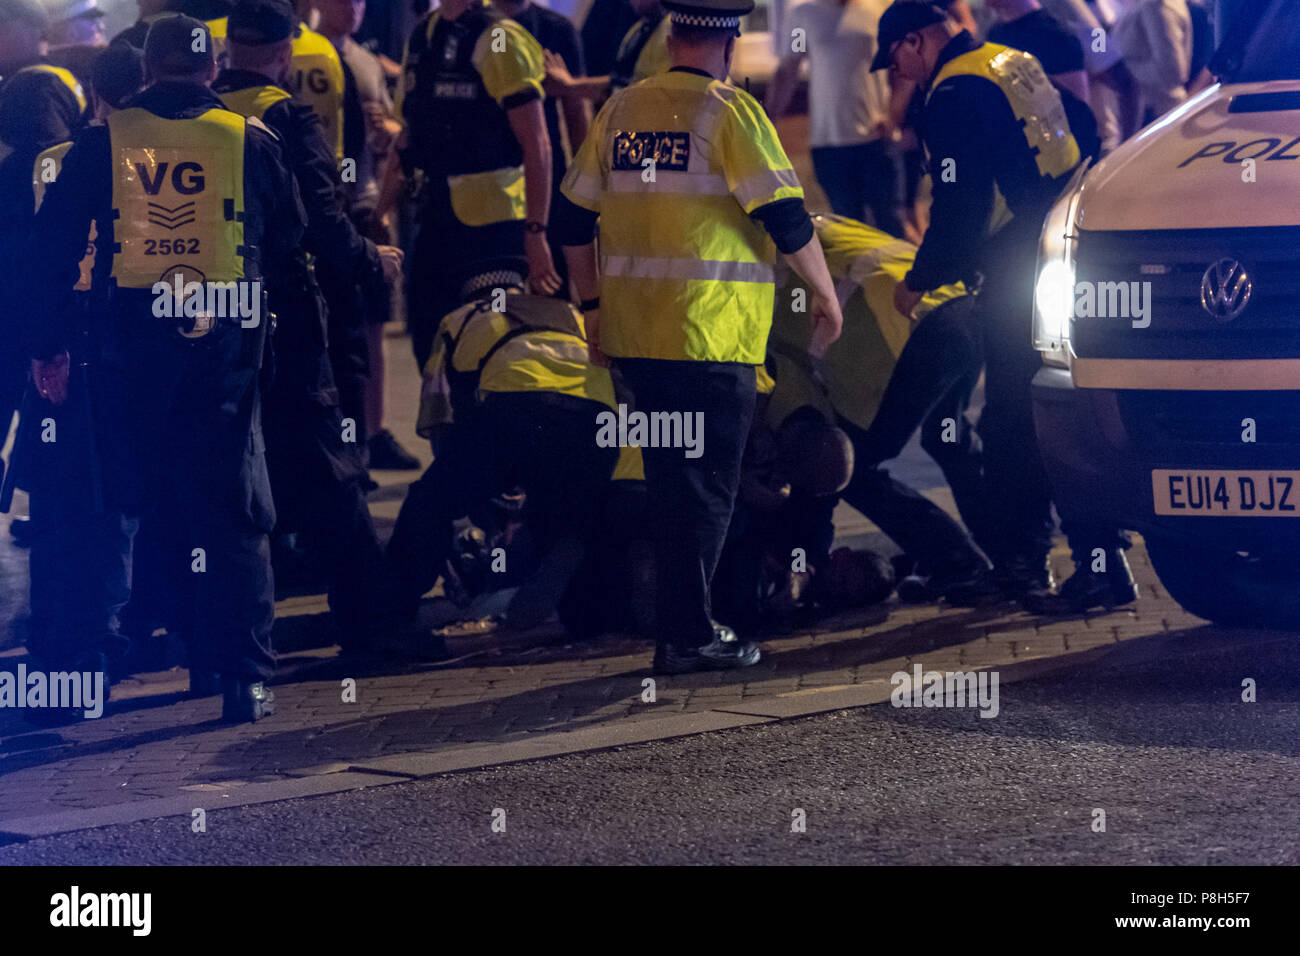 Brentwood Essex11th June 2018 Approximately fifty police officers deployed in Brentwood Essex  following England losing against Croatia.  Fans tears turned to disorder and Essex police had to clear fans down the entire length of the High Street.  One small group of fans challenged the police and arrests were made. Credit Ian Davidson/Alamy Live News Stock Photo